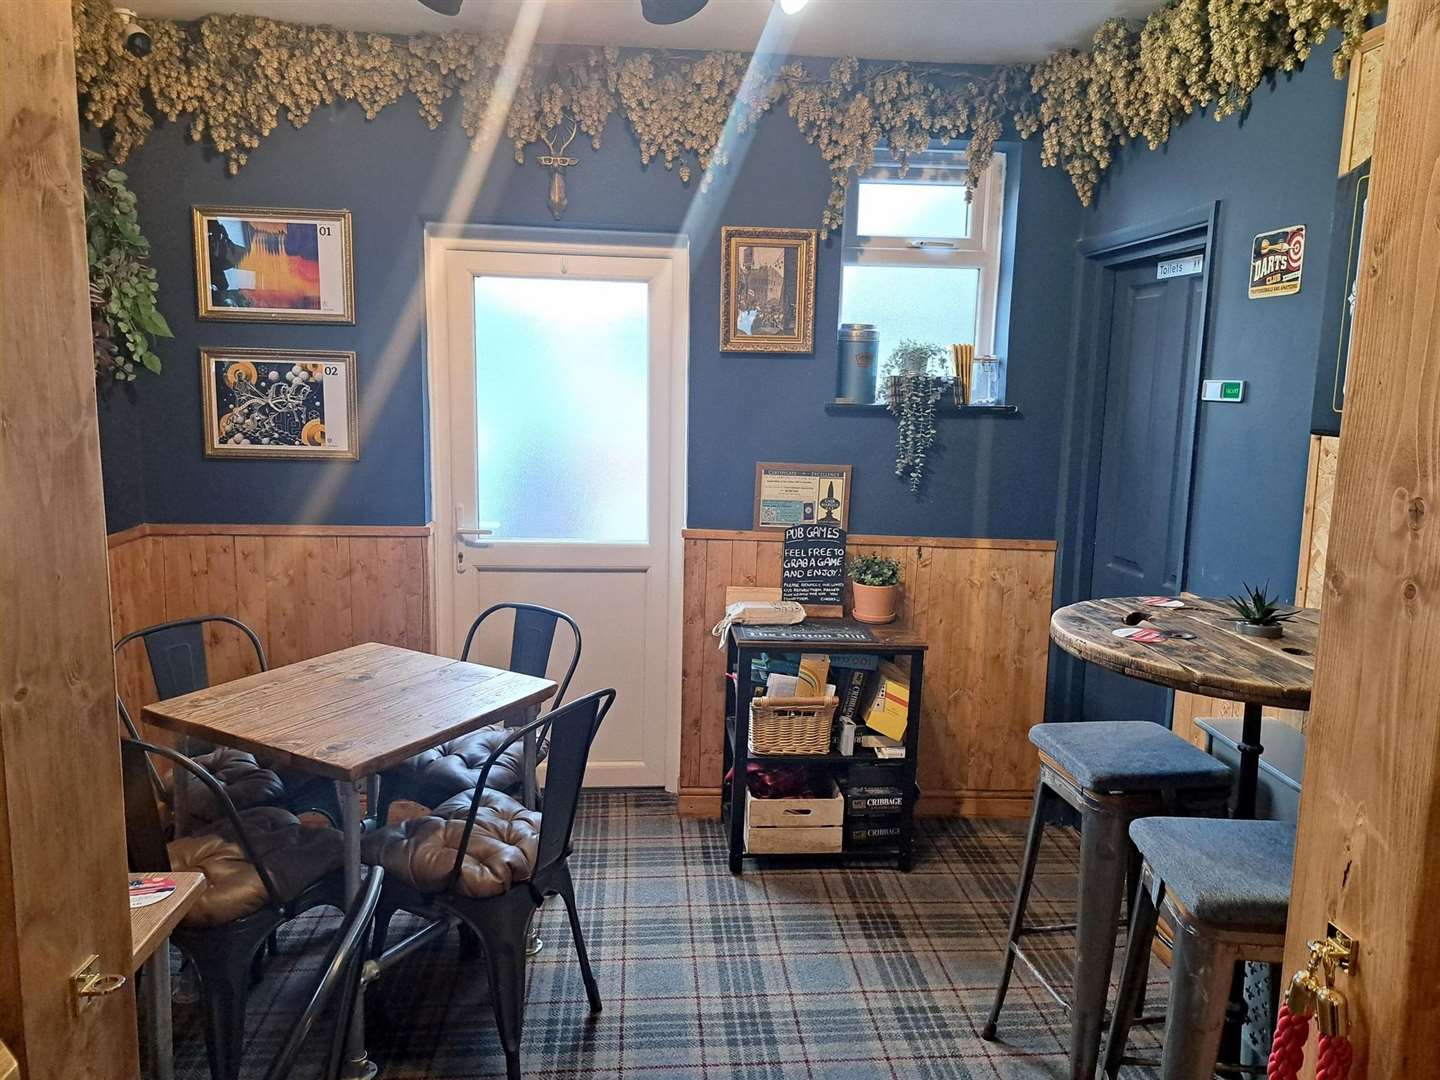 The Cotton Mill in Swanley recently extended their inside seating area after the taxi office in the back corner of the building shut. Photo: Swanley Town Council